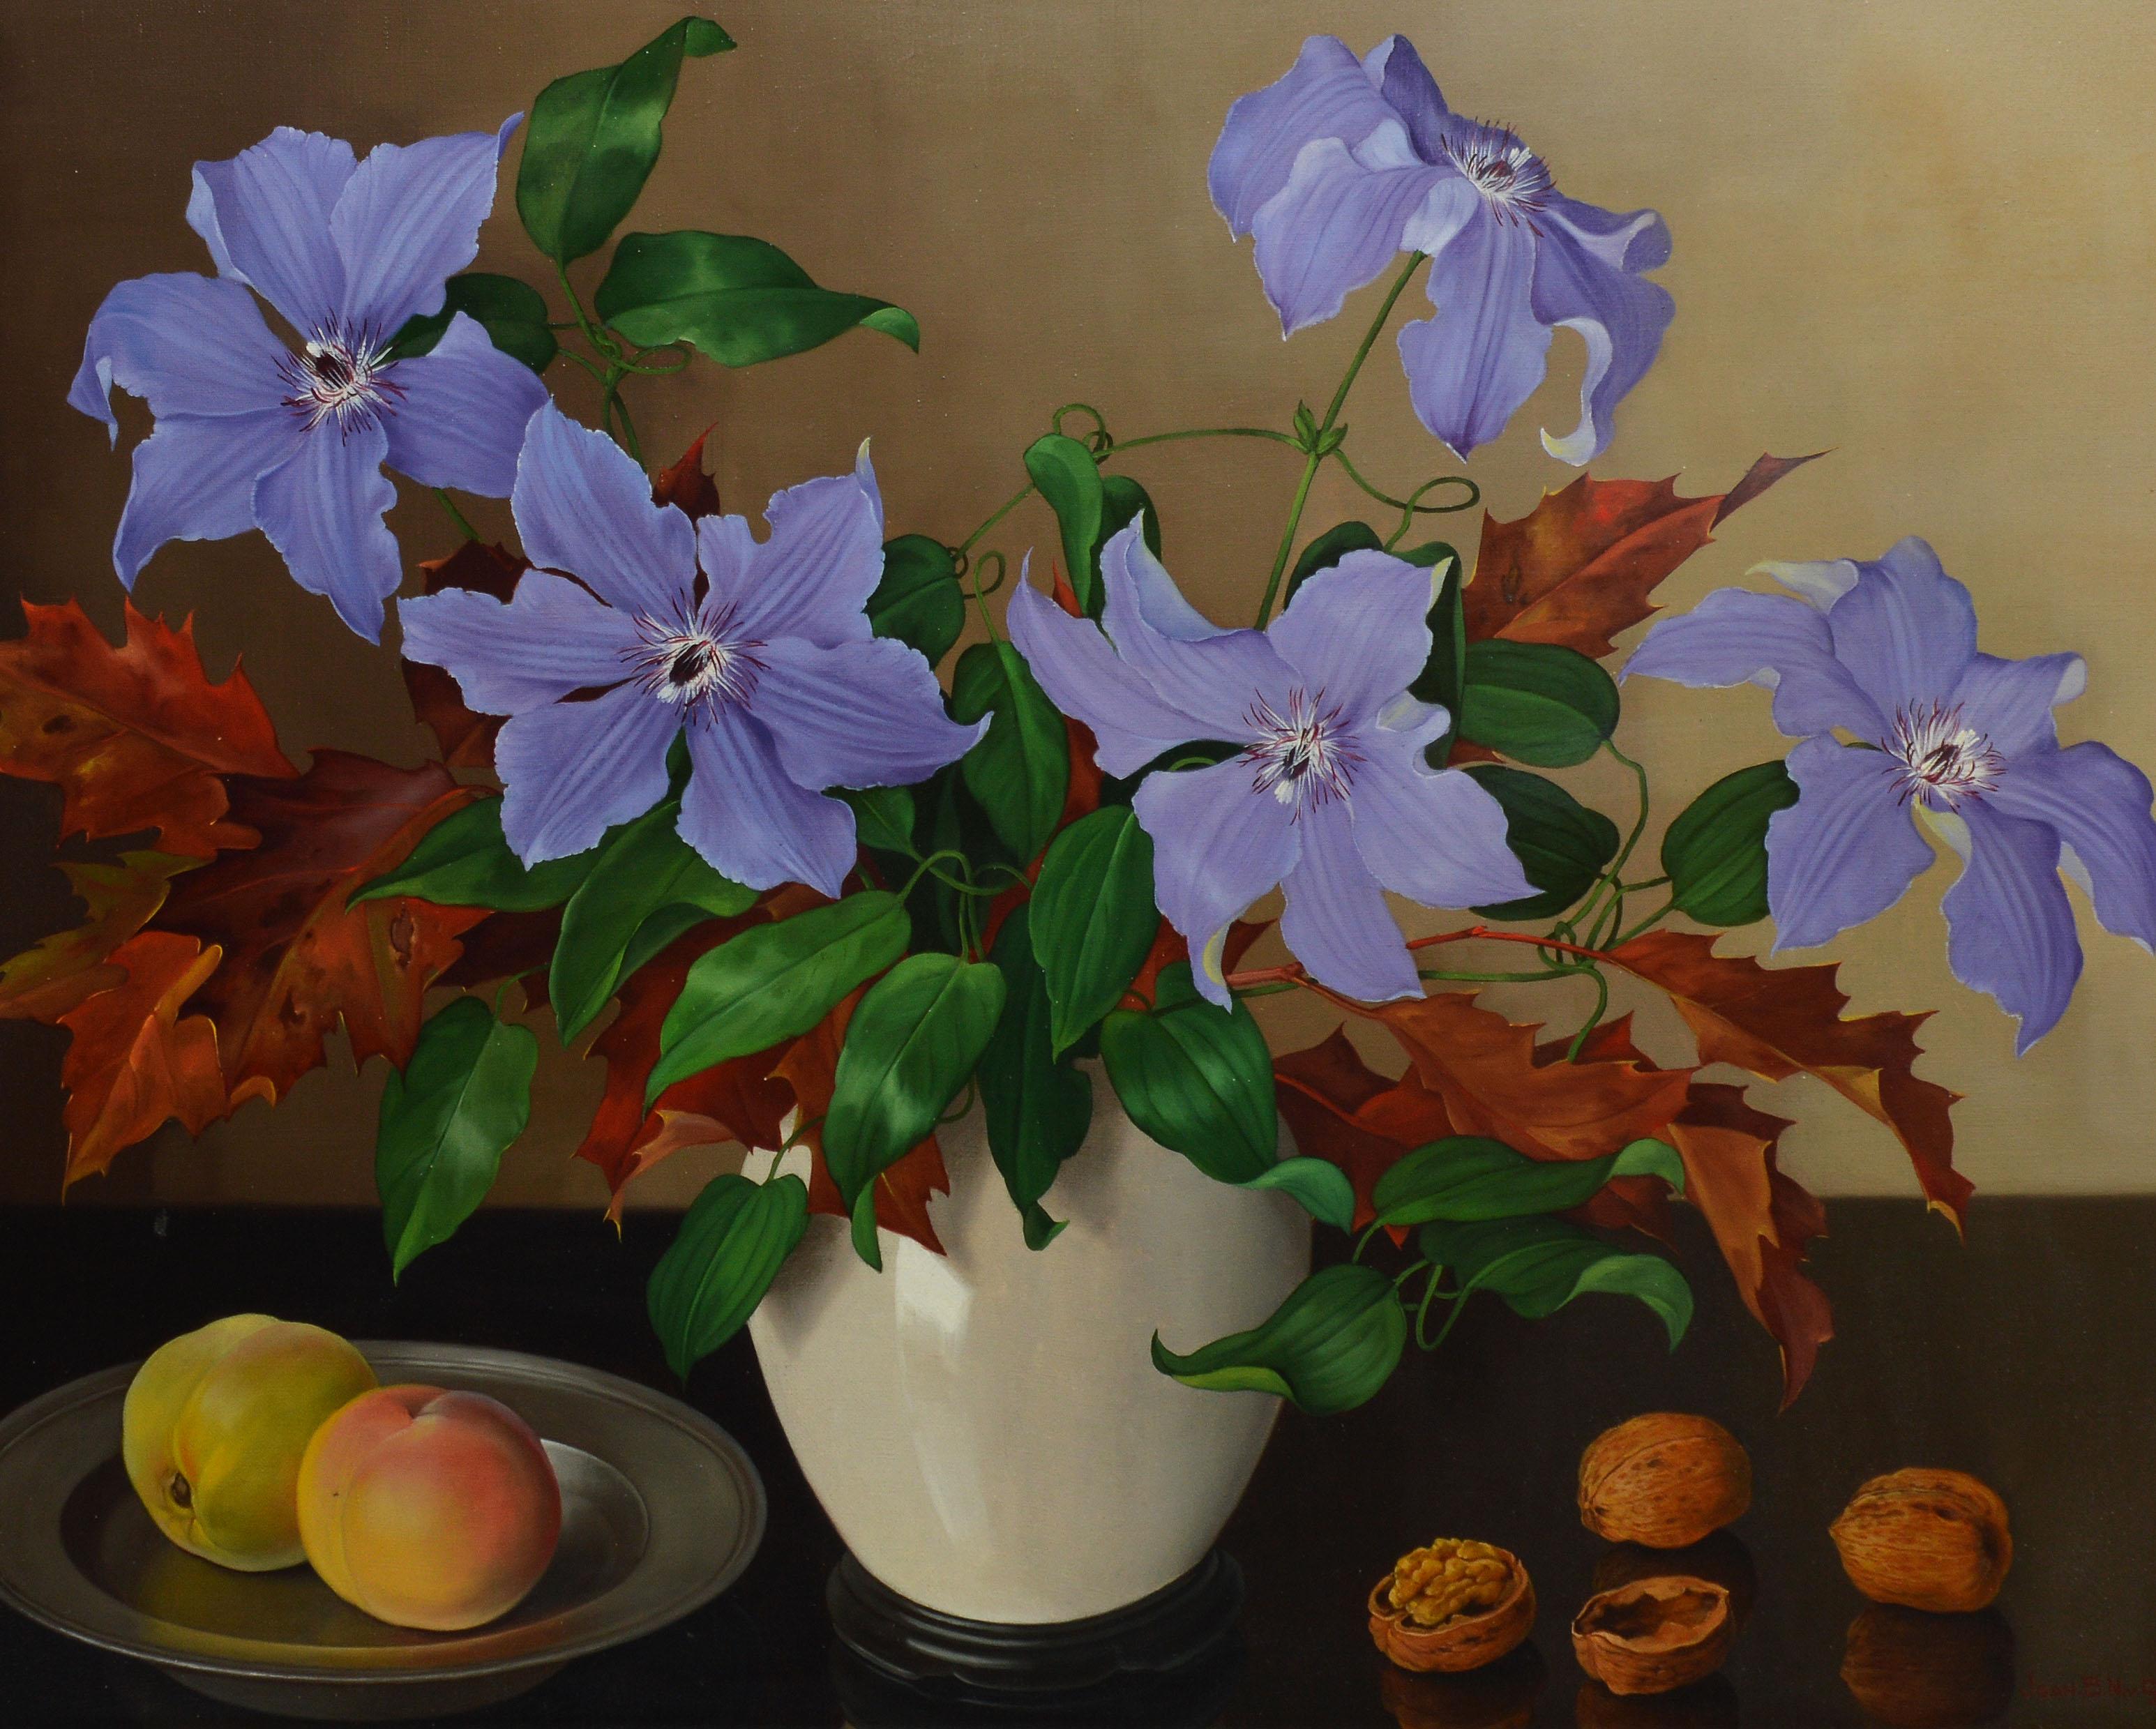 Vintage American Oil Painting Trompe L'Oeil Flower Still Life by Joan Nugent - Brown Still-Life Painting by Joan B. Nugent